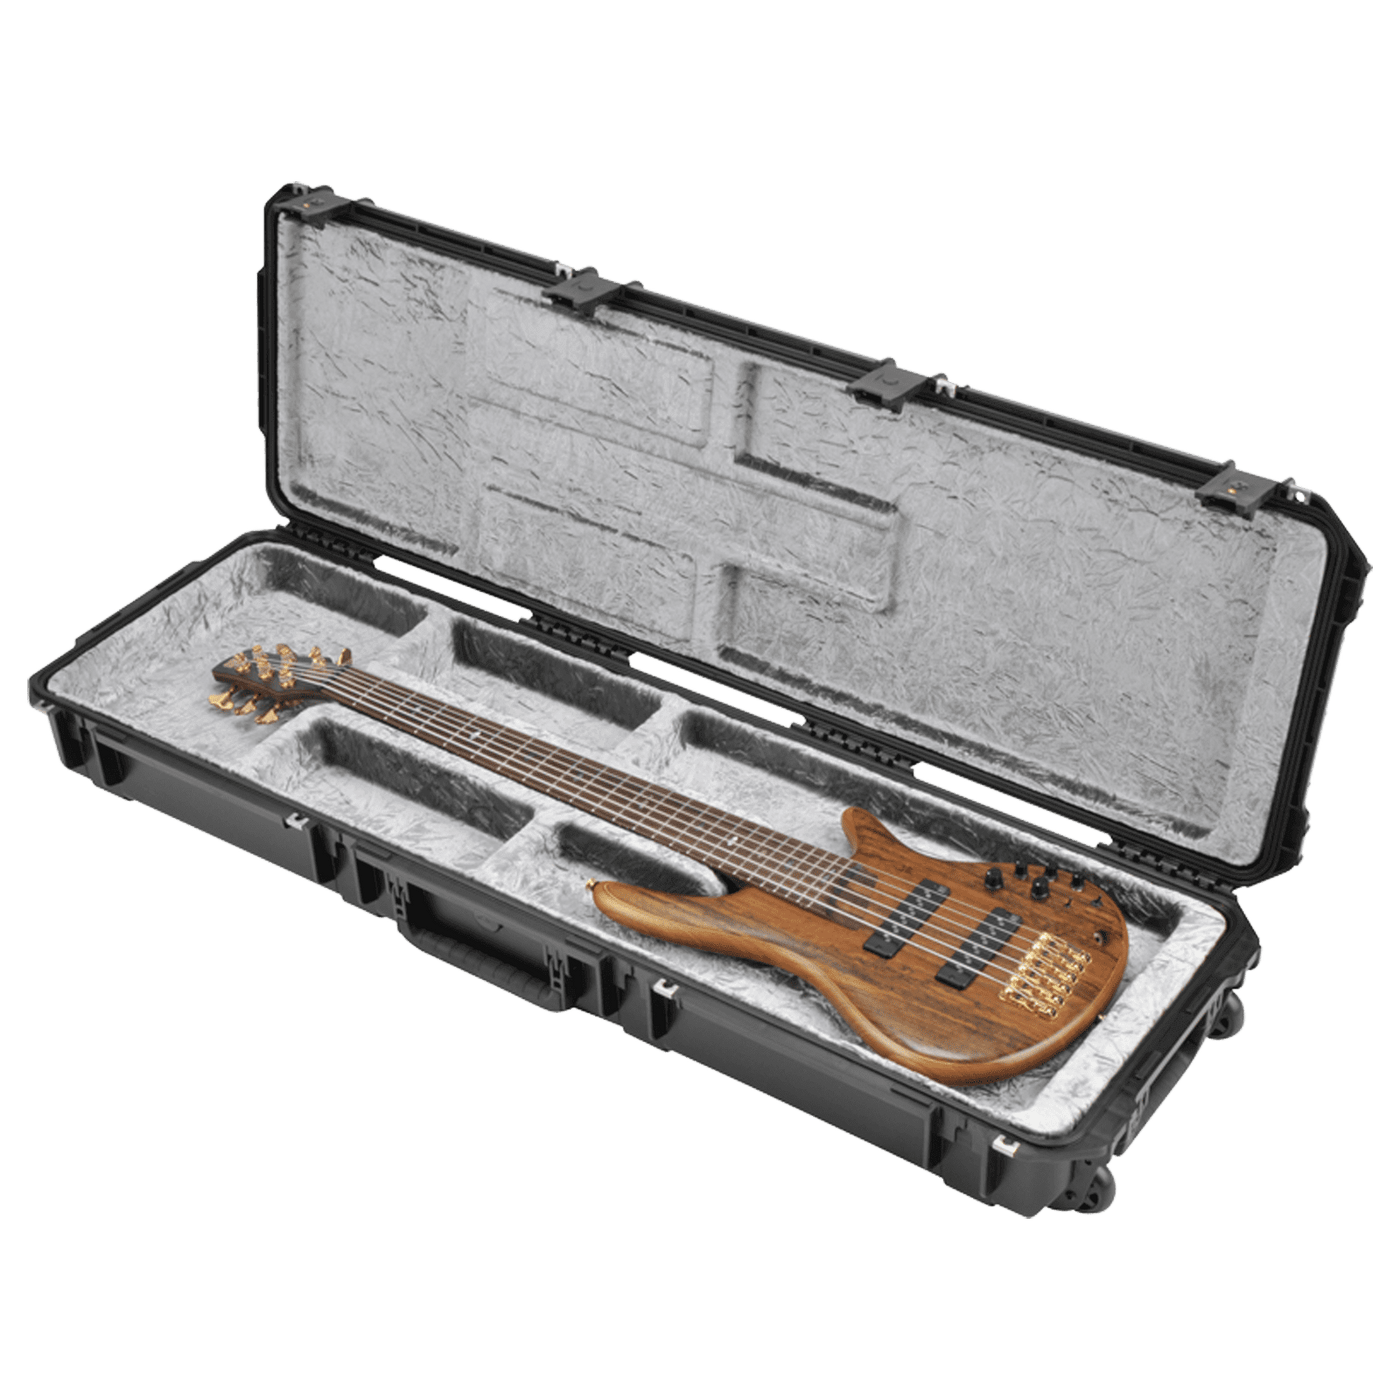 SKB iSeries Waterproof ATA (Open Cavity Bass Case) - SKB revolutionized the industry with the first INJECTION molded guitar case! To accommodate a wider variety of body shapes they have developed the iSeries 5014-OP Open Cavity Electric Bass case.iSeries